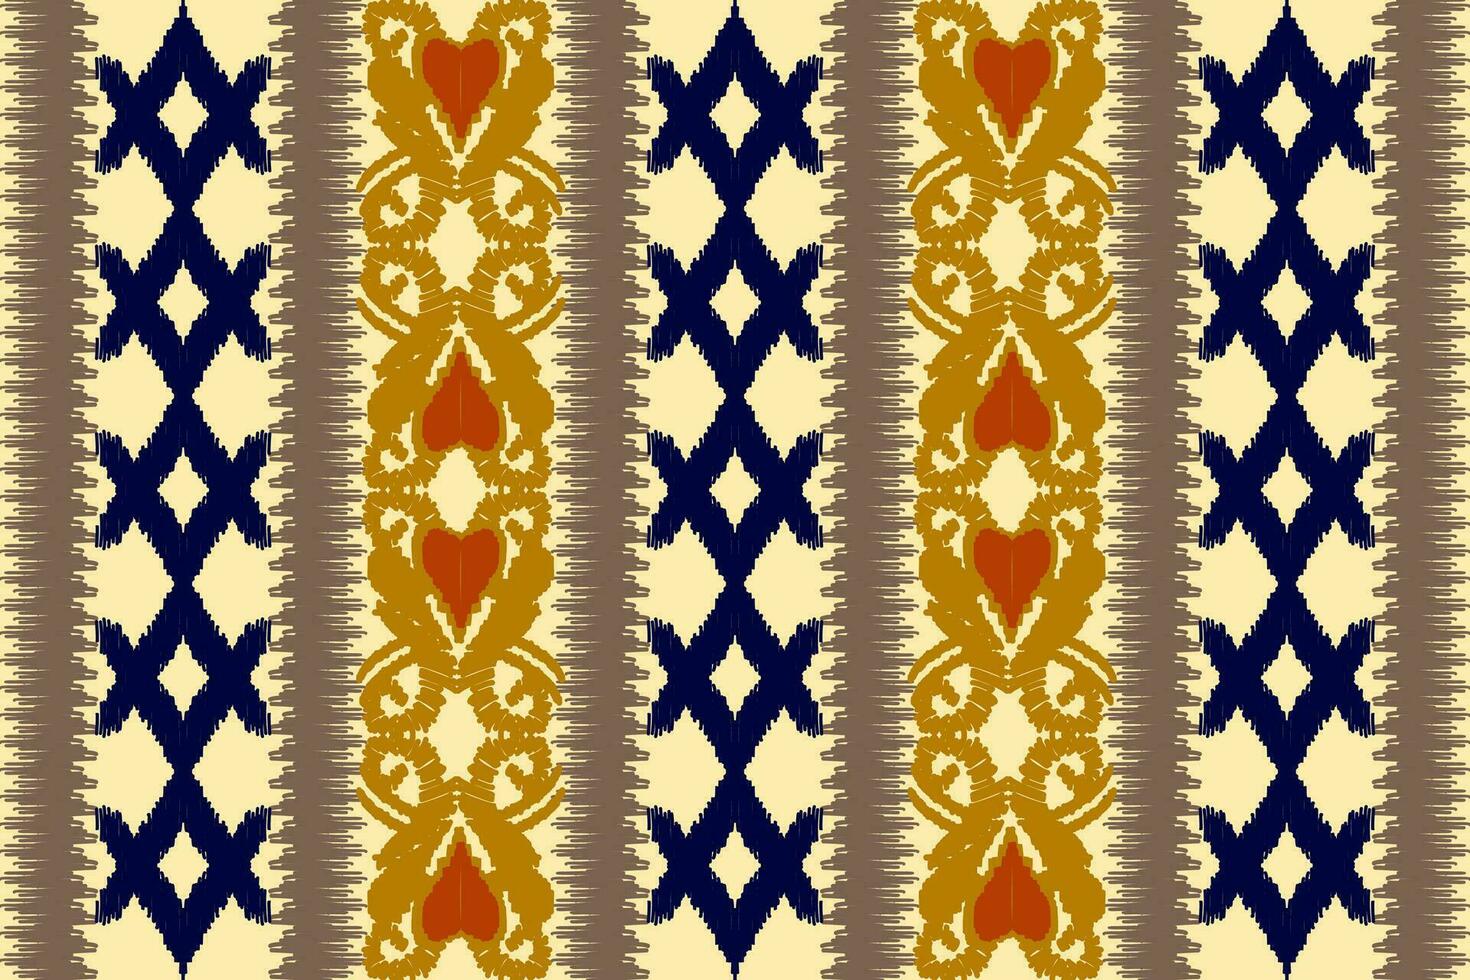 Thai Ikat paisley pattern on light yellow background, traditional oriental geometric pattern, aztec abstract vector pattern design for